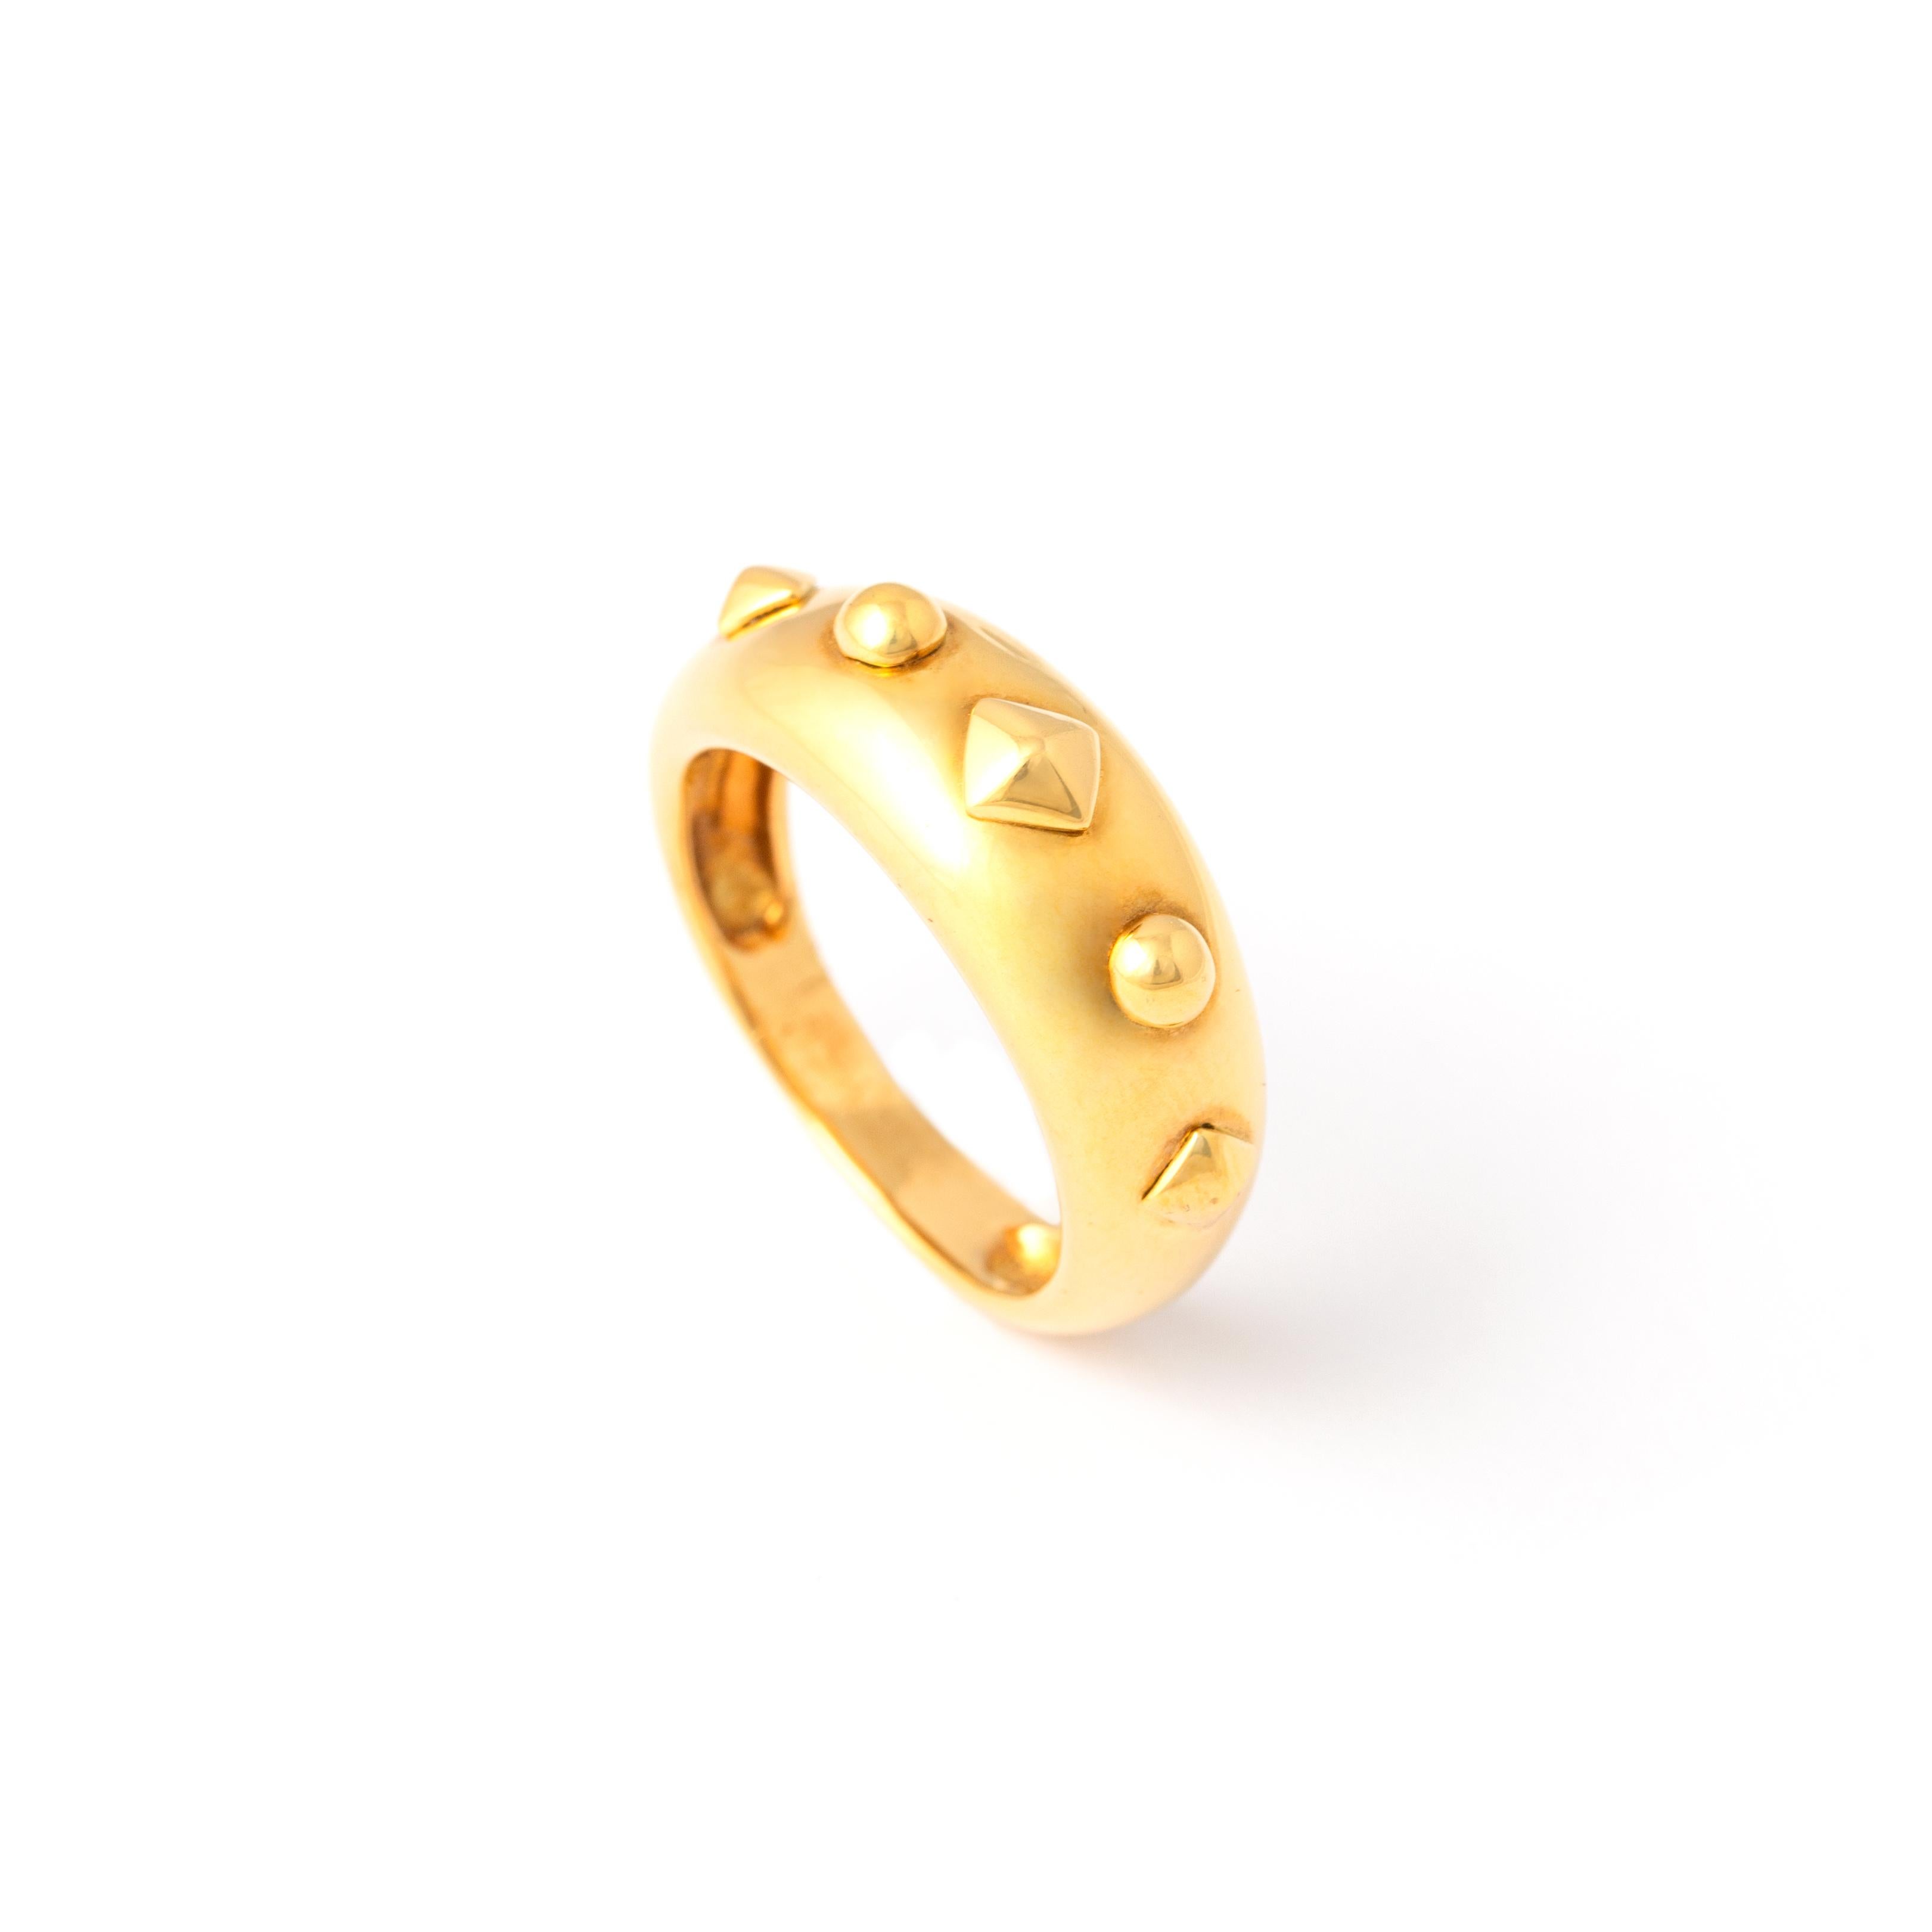 Diamond Yellow Gold 18K Ring.
Late 20th Century.
Size: 54
Total weight: 6.55 grams.